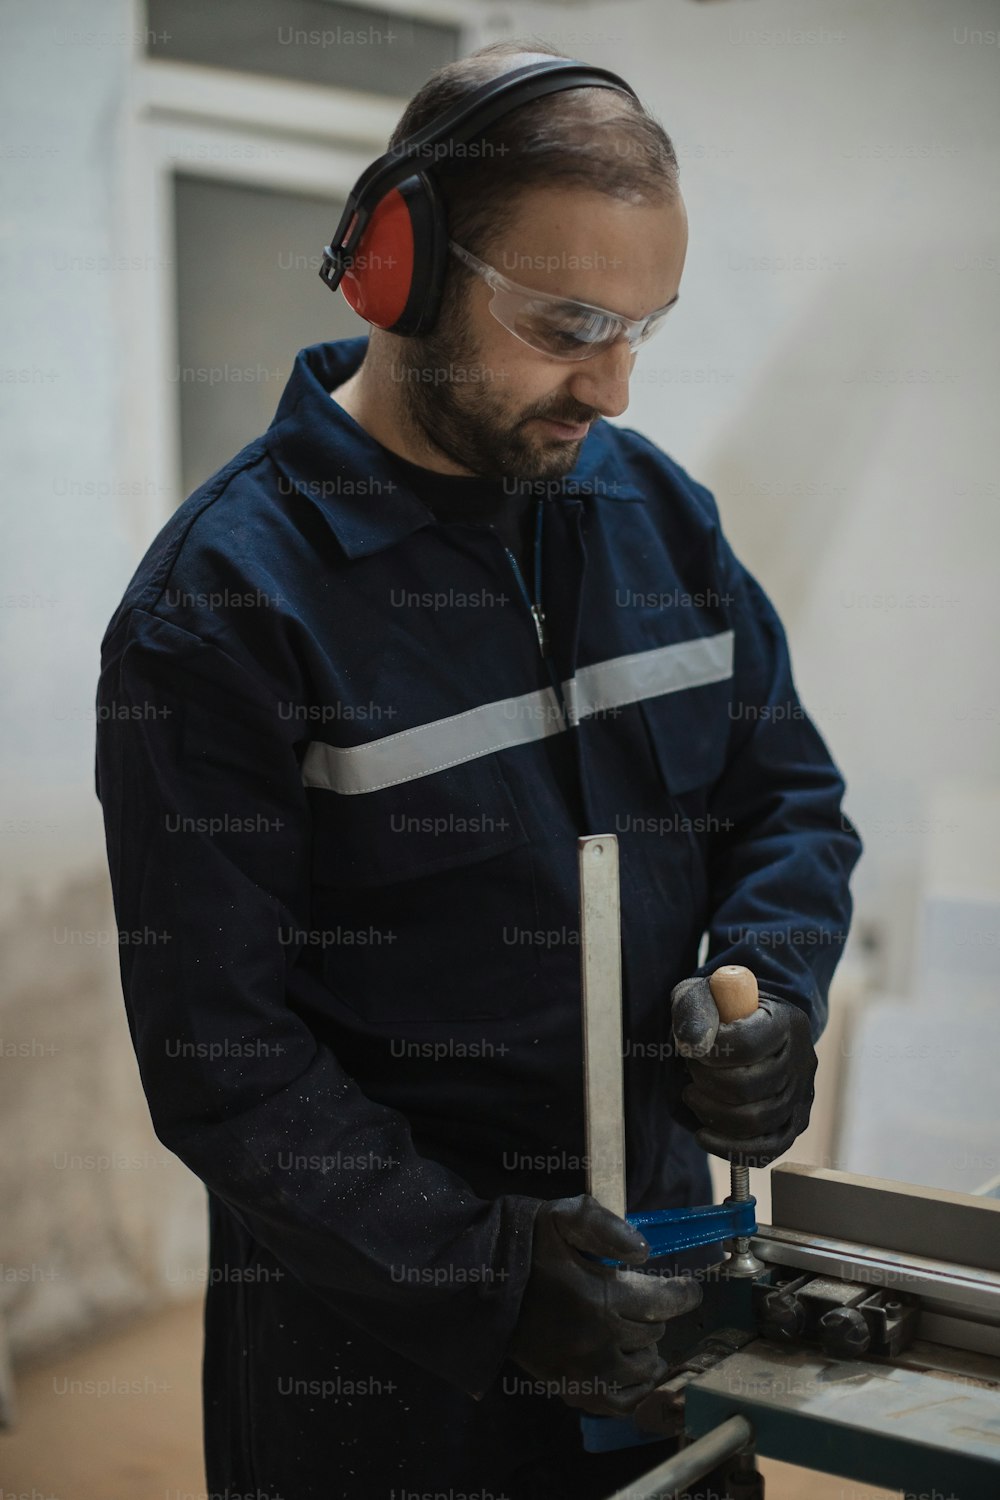 a man with headphones on working on a machine